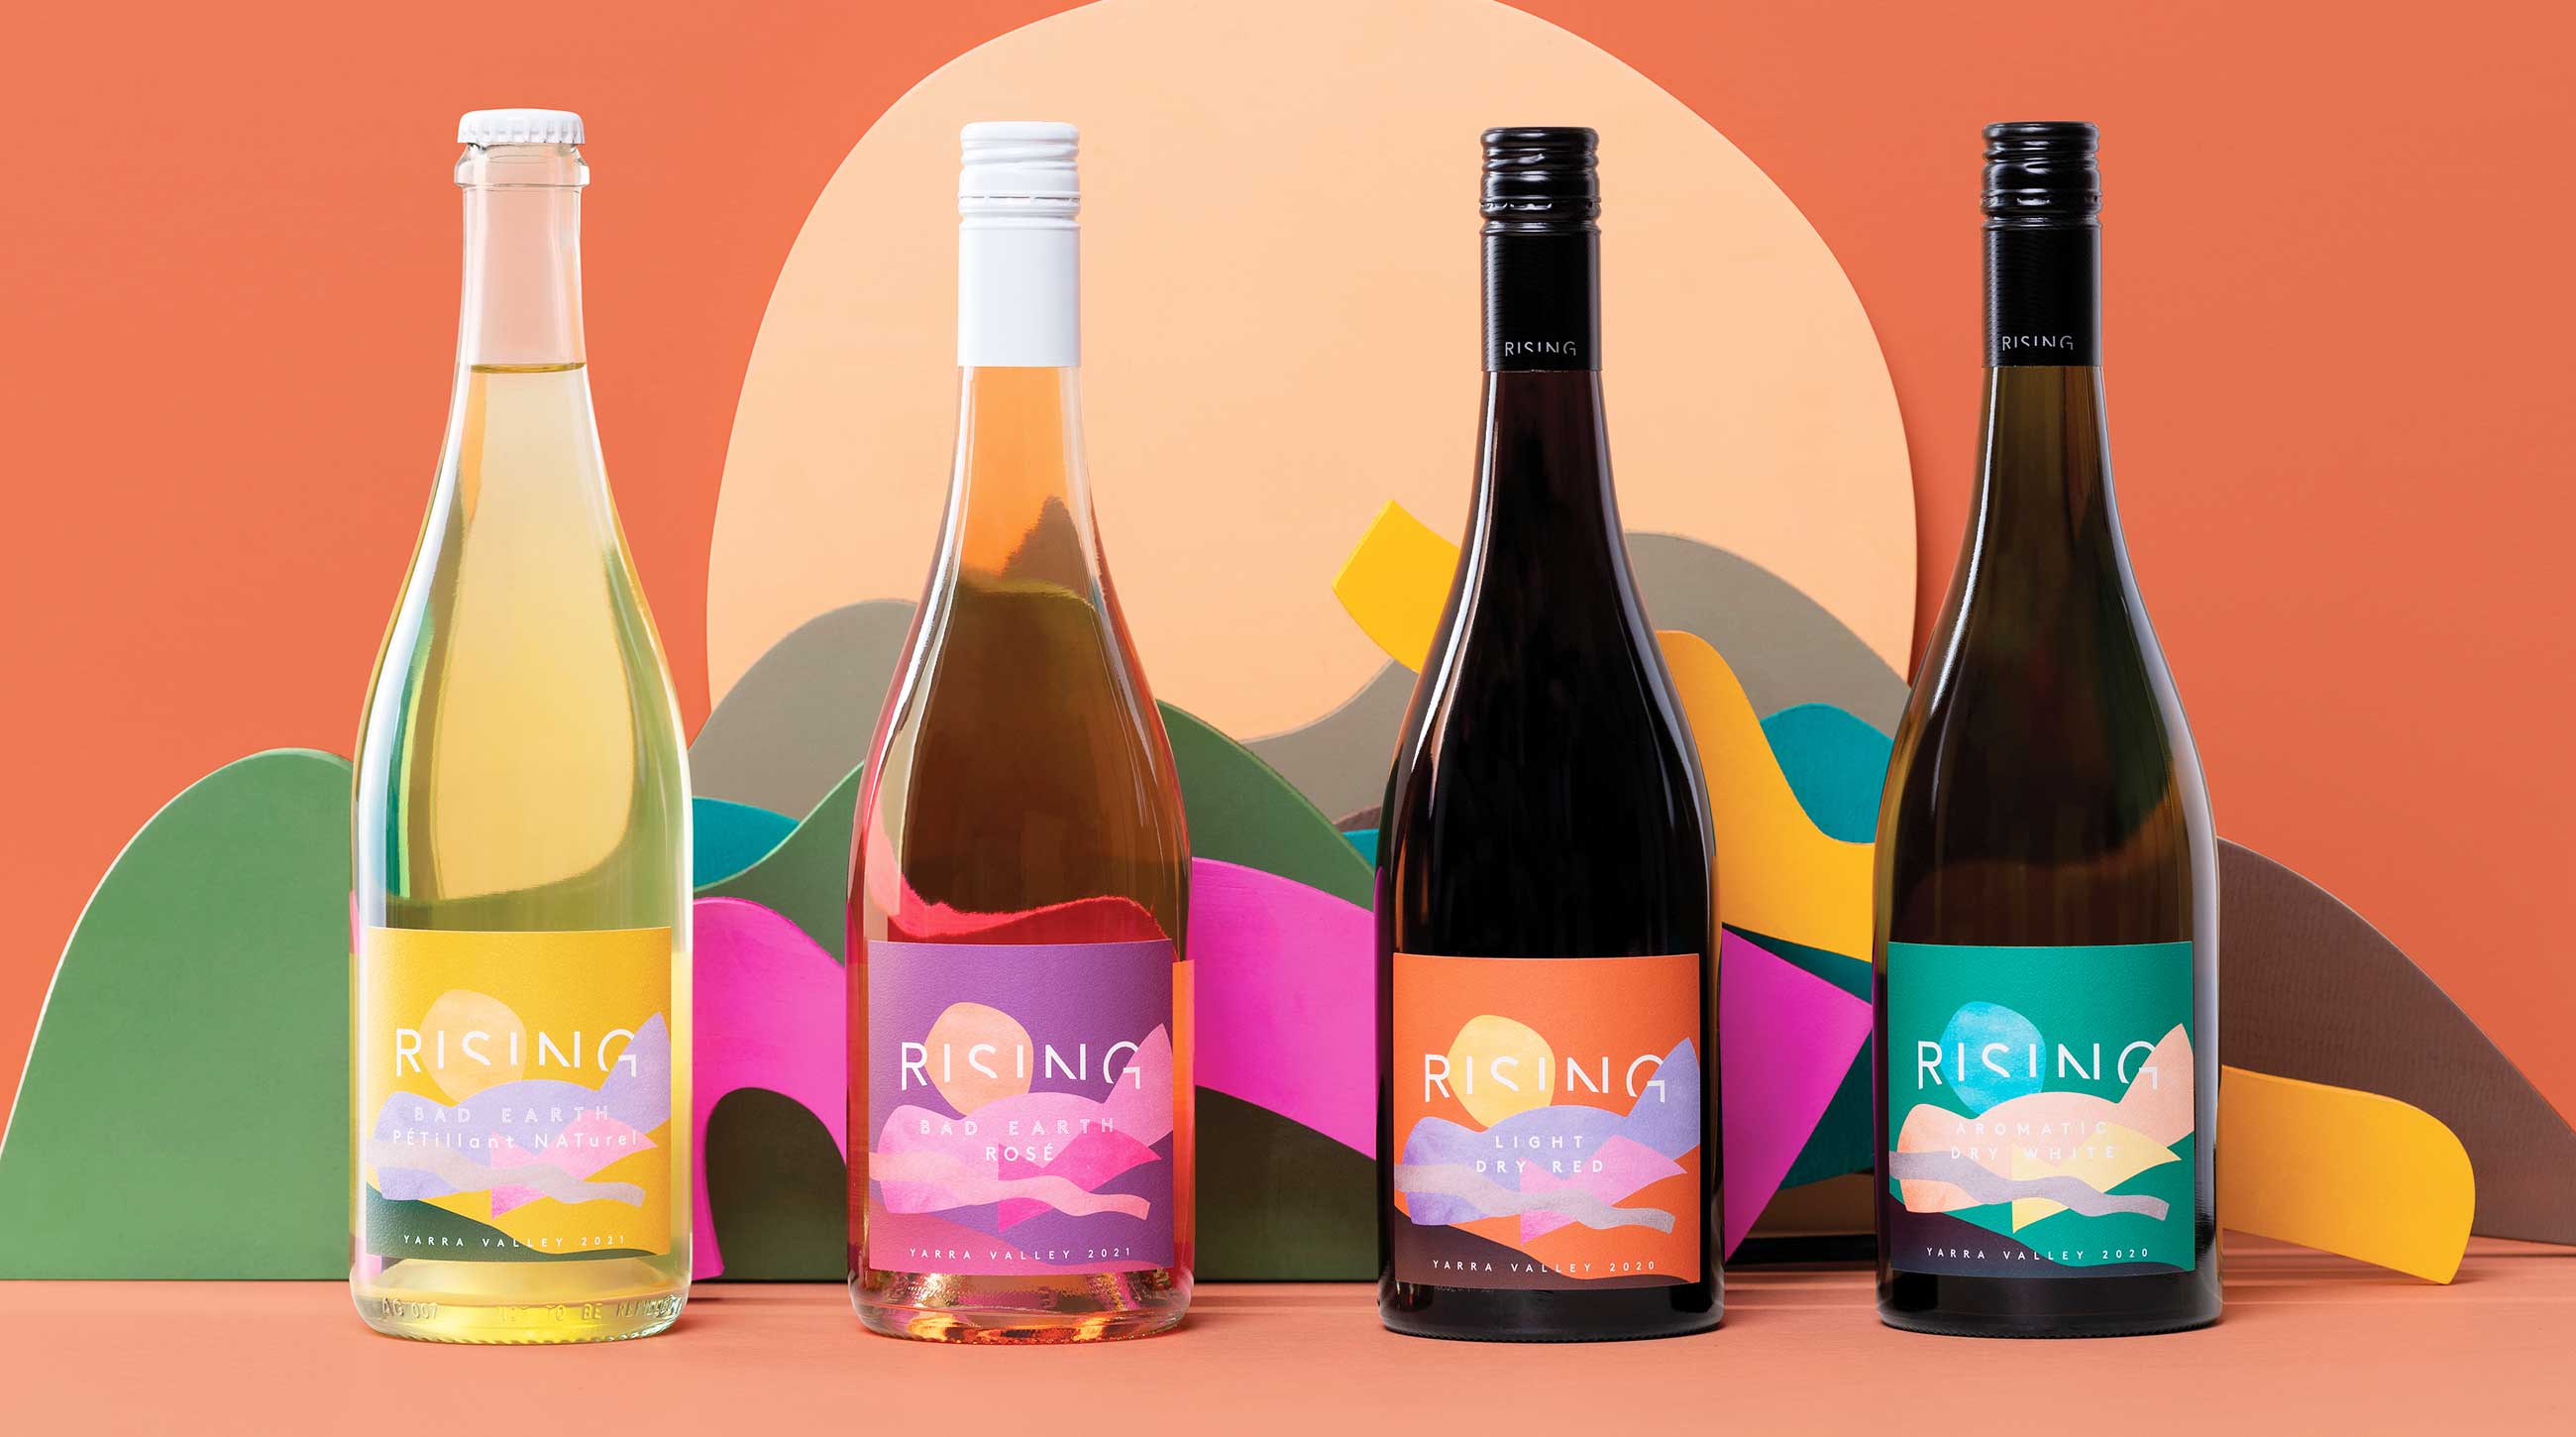 Rising Wines labels designed in the Yarra Valley by Sonsie.